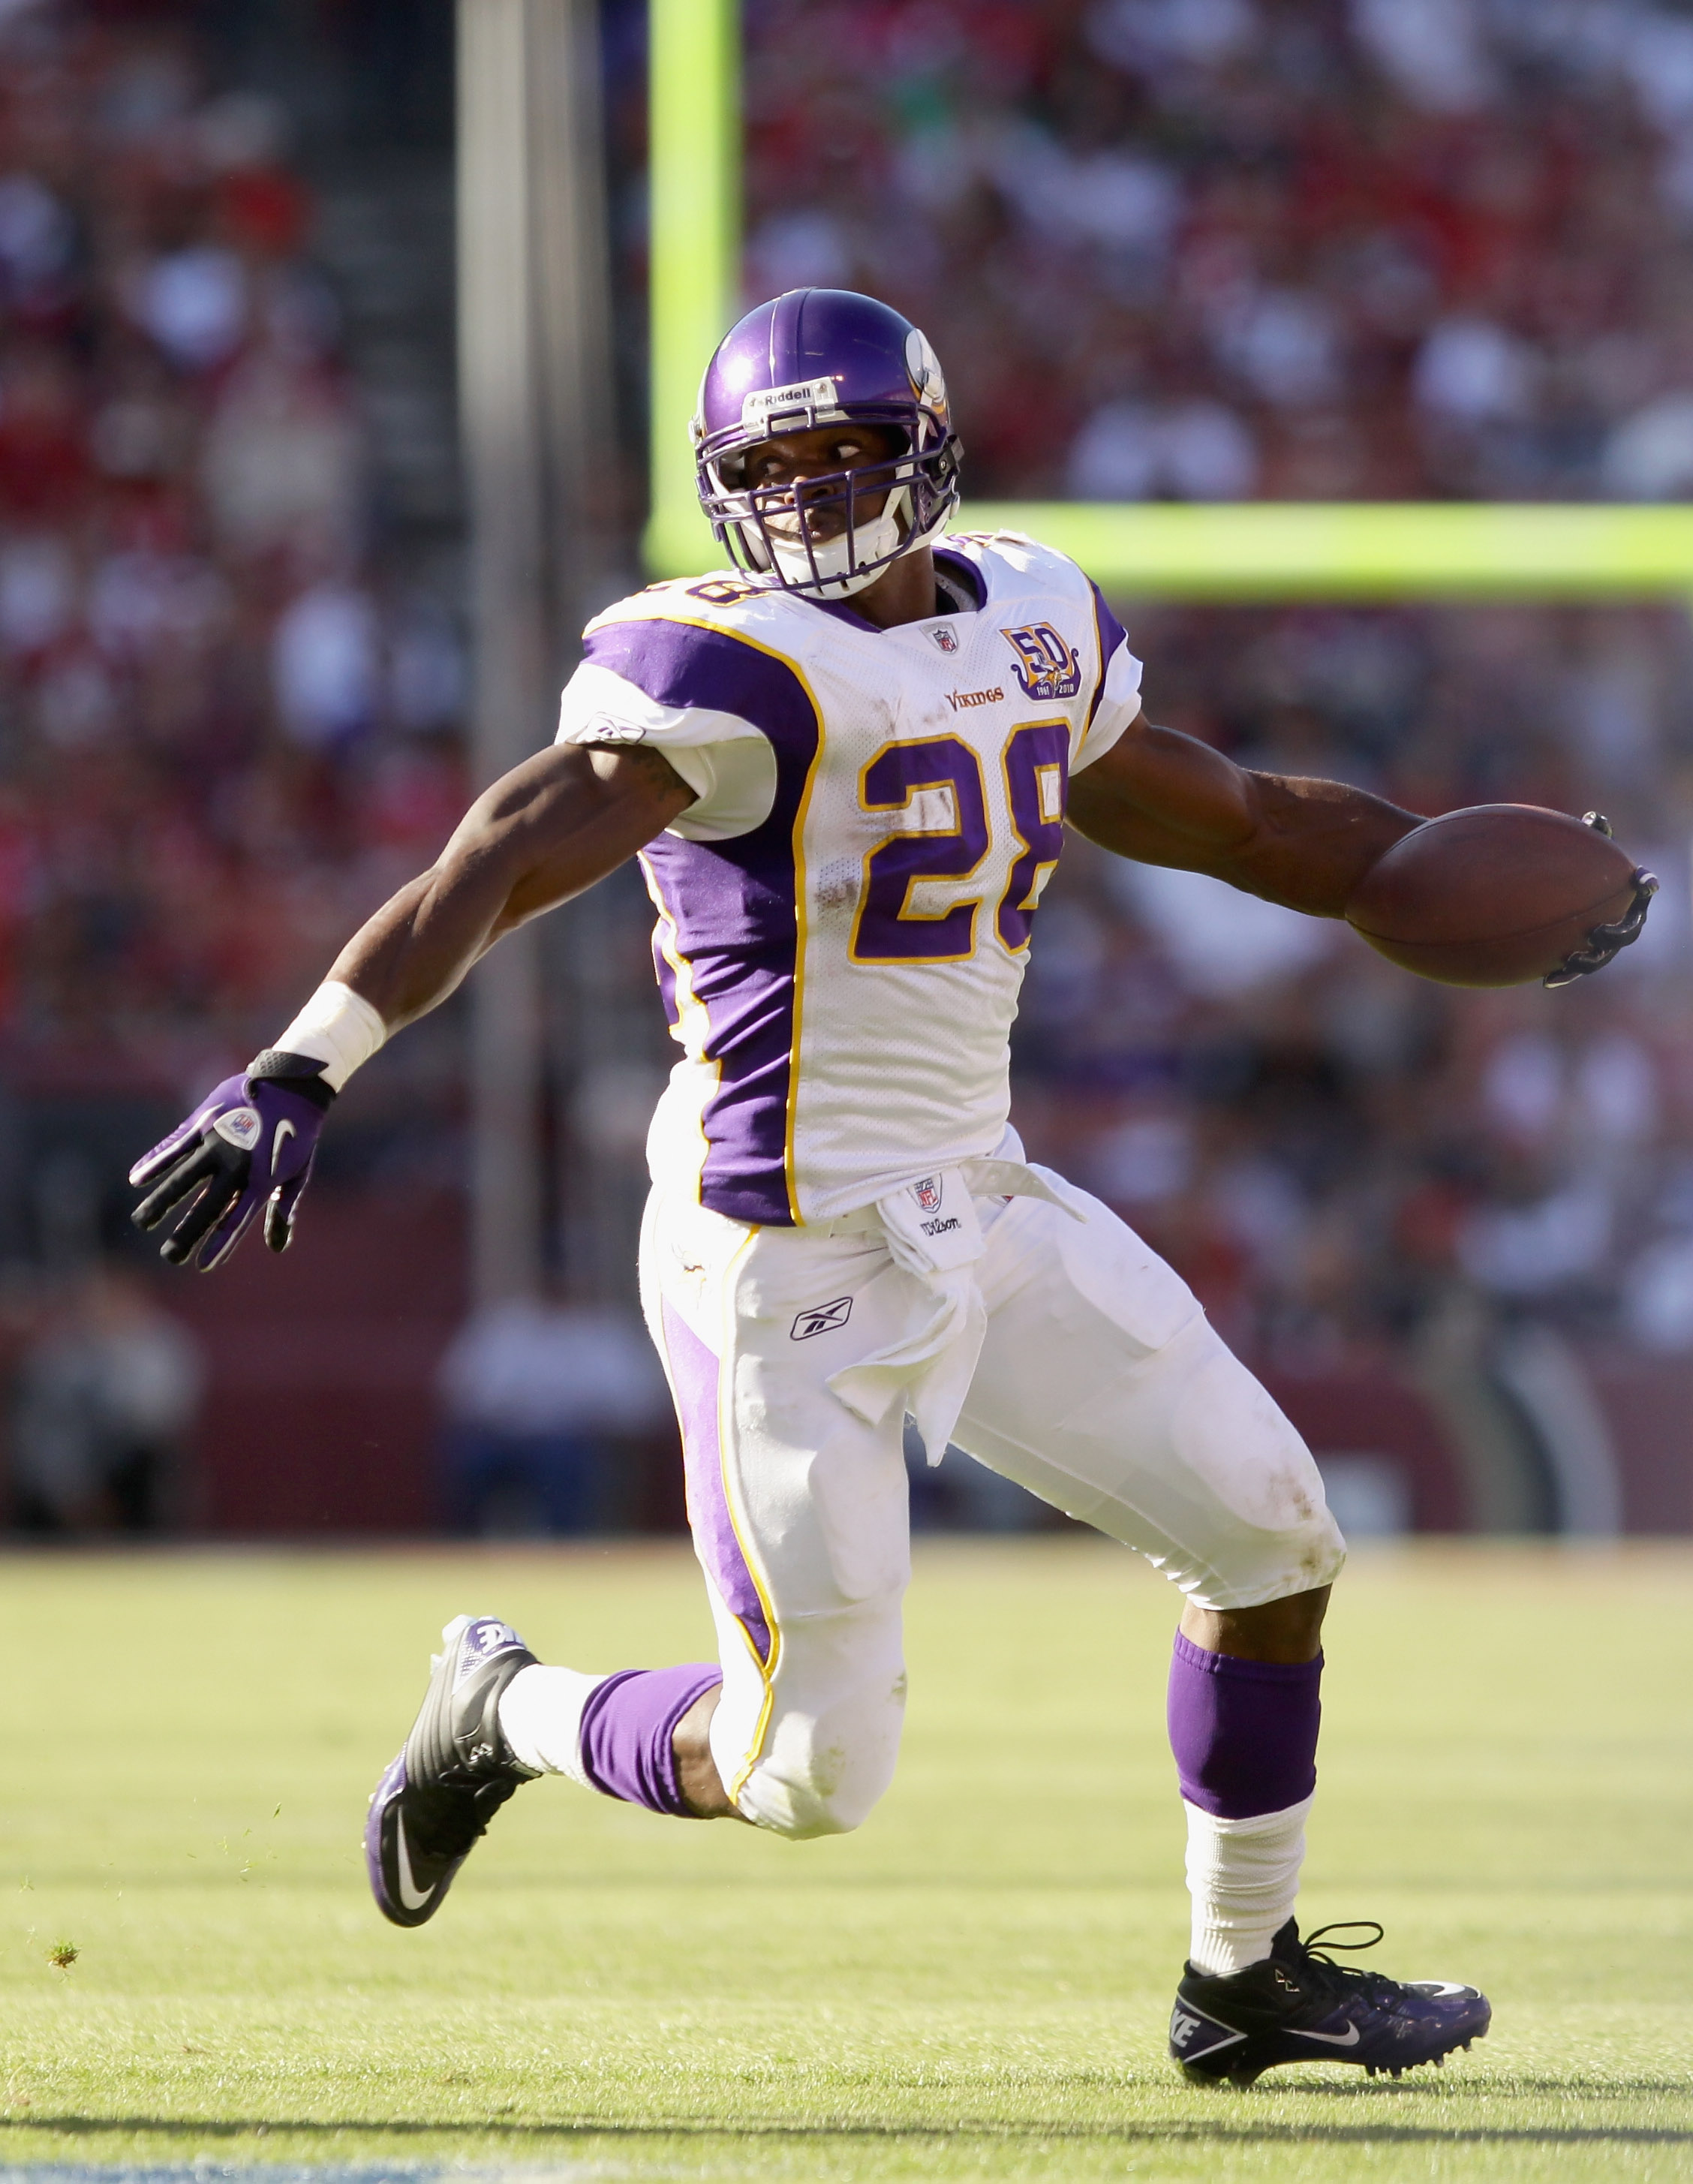 SAN FRANCISCO - AUGUST 22:  Adrian Peterson #28 of the Minnesota Vikings runs with the ball during their preseason game against the San Francisco 49ers at Candlestick Park on August 22, 2010 in San Francisco, California.  (Photo by Ezra Shaw/Getty Images)